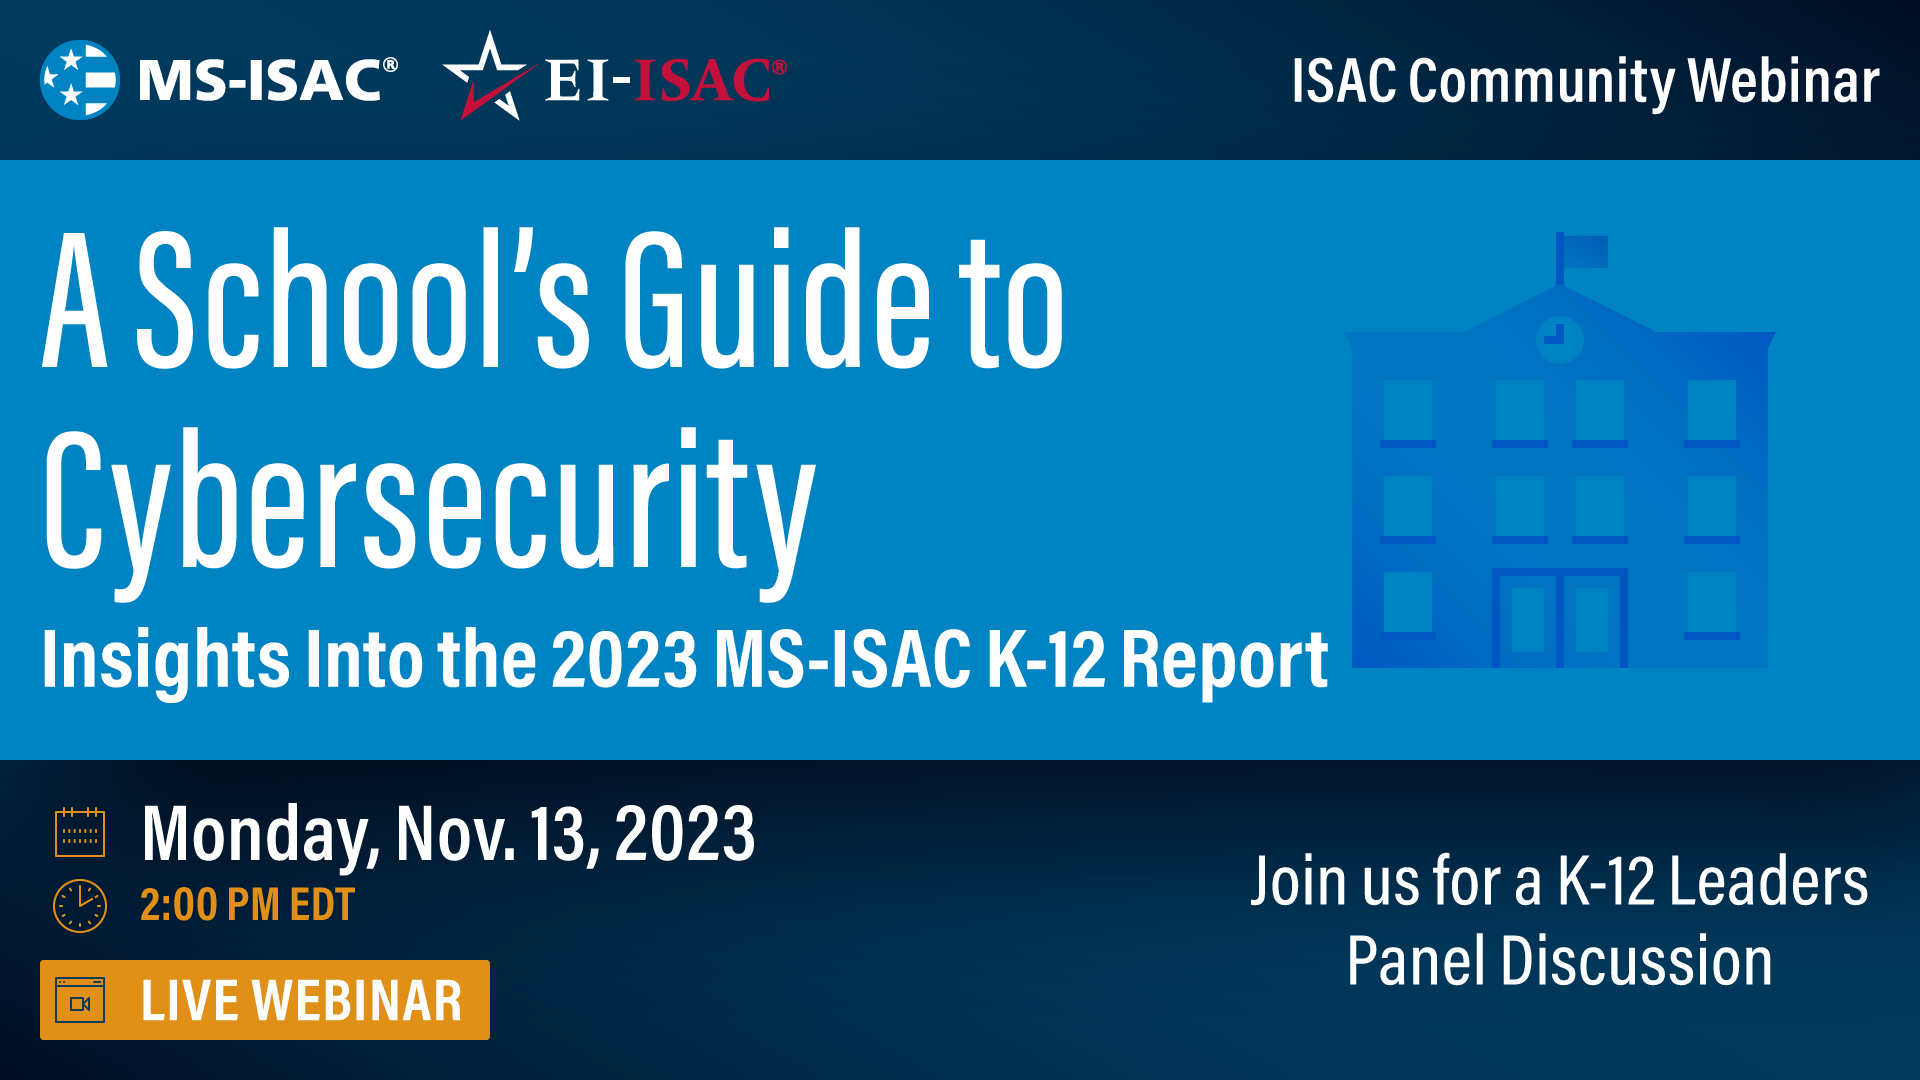 A School’s Guide to Cybersecurity: Insights Into The 2023 MS-ISAC K-12 Report